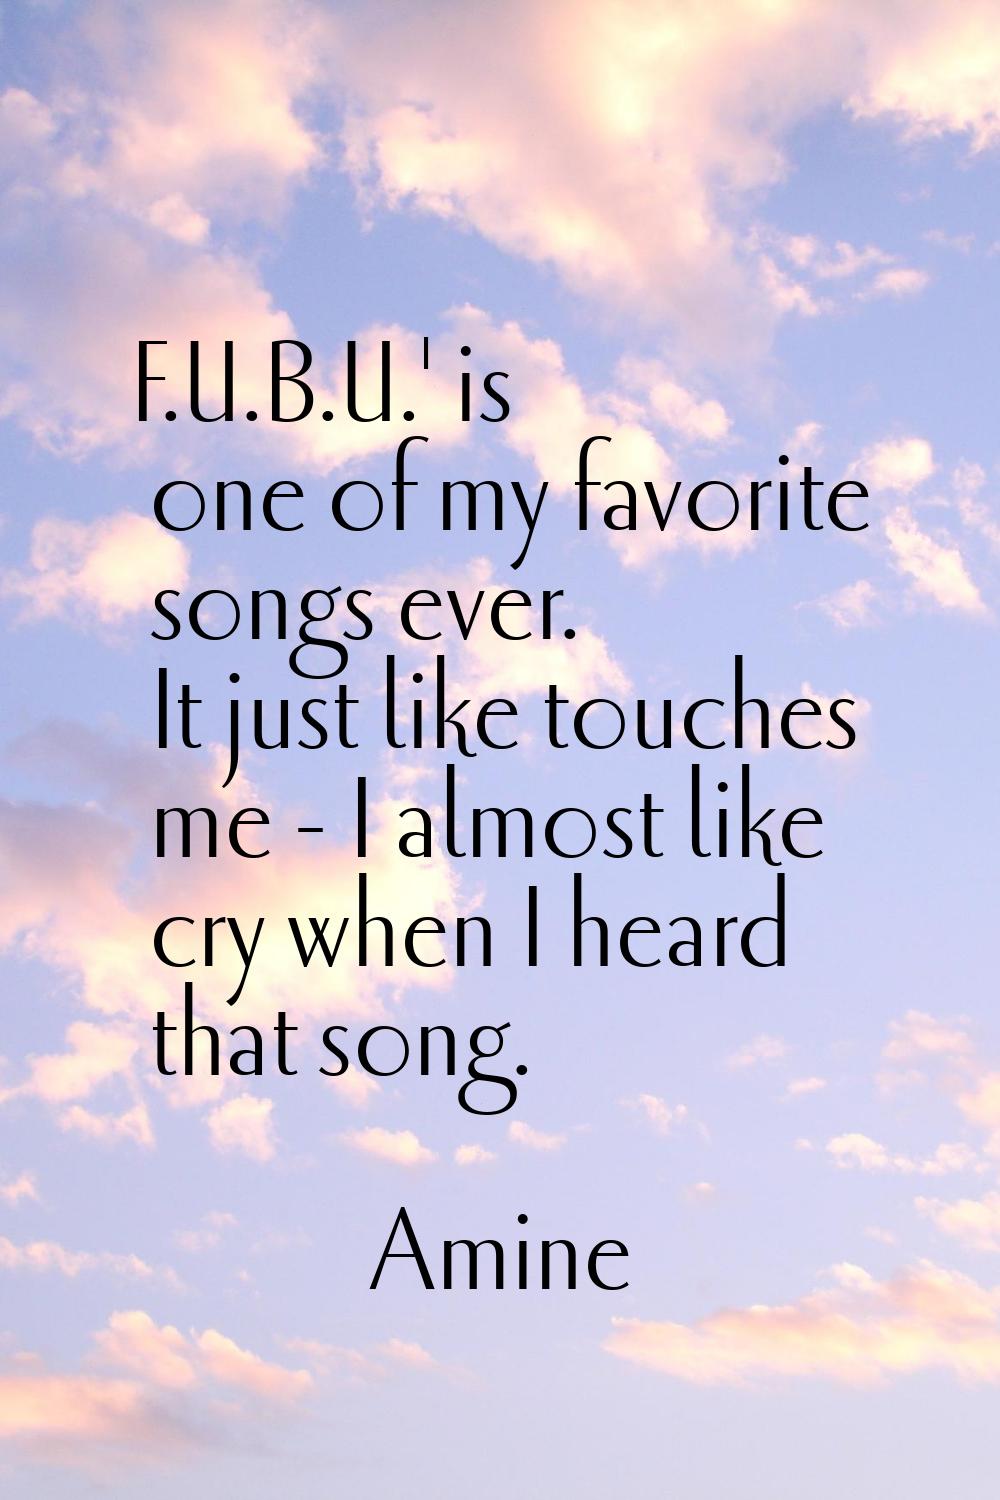 F.U.B.U.' is one of my favorite songs ever. It just like touches me - I almost like cry when I hear